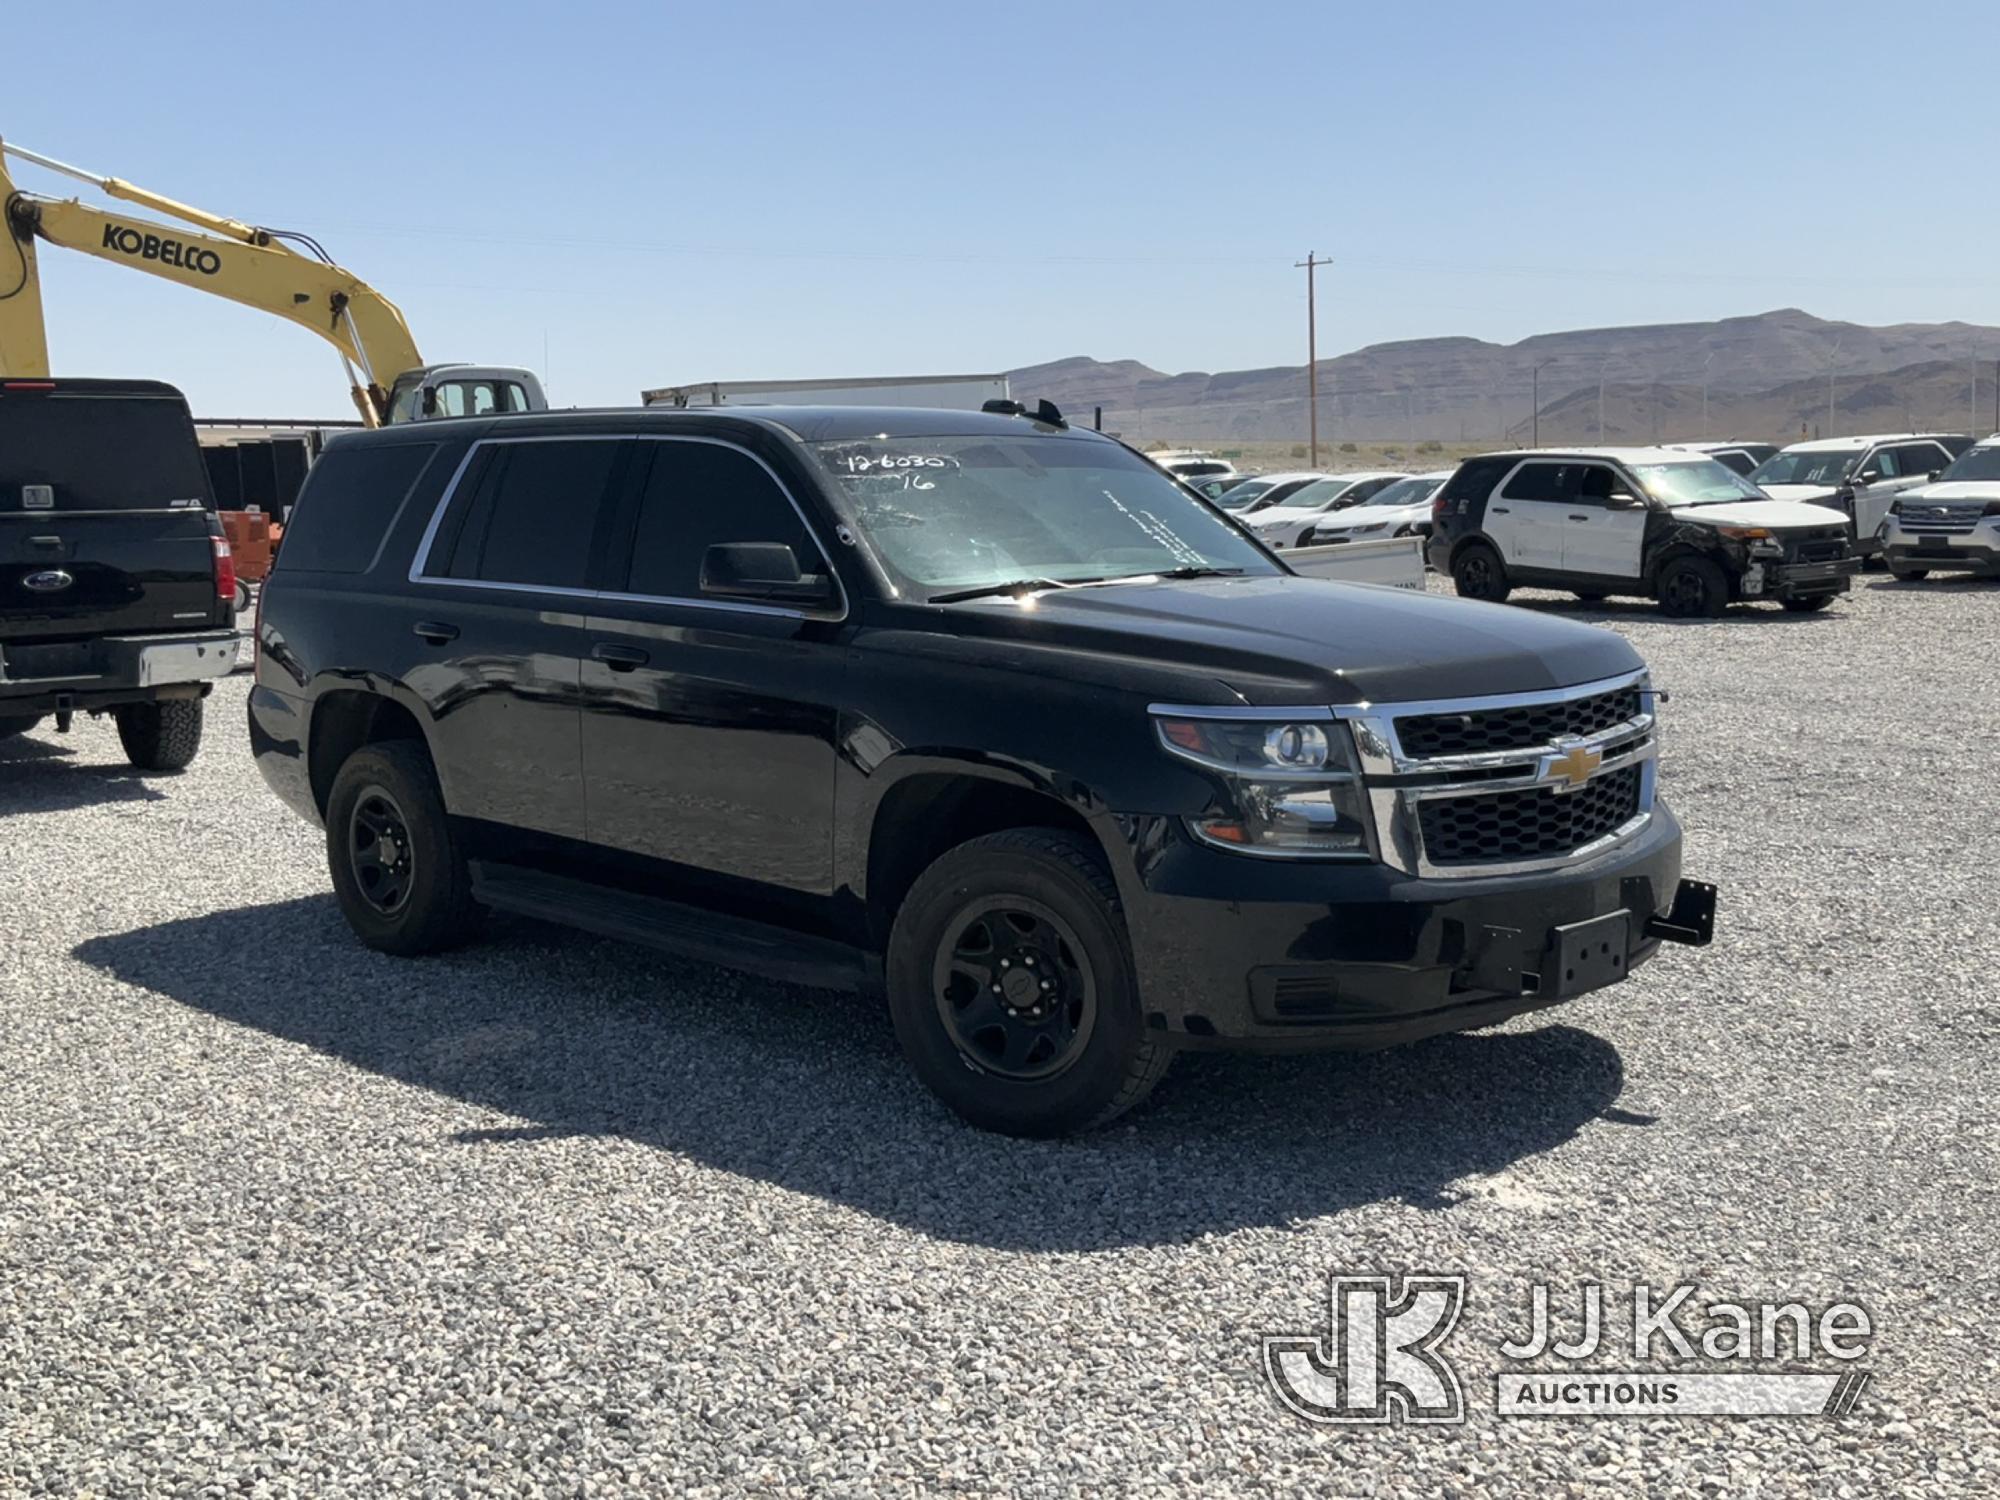 (Las Vegas, NV) 2016 Chevrolet Tahoe Police Package Towed In, No Console, Rear Seats Unbolted, Engin